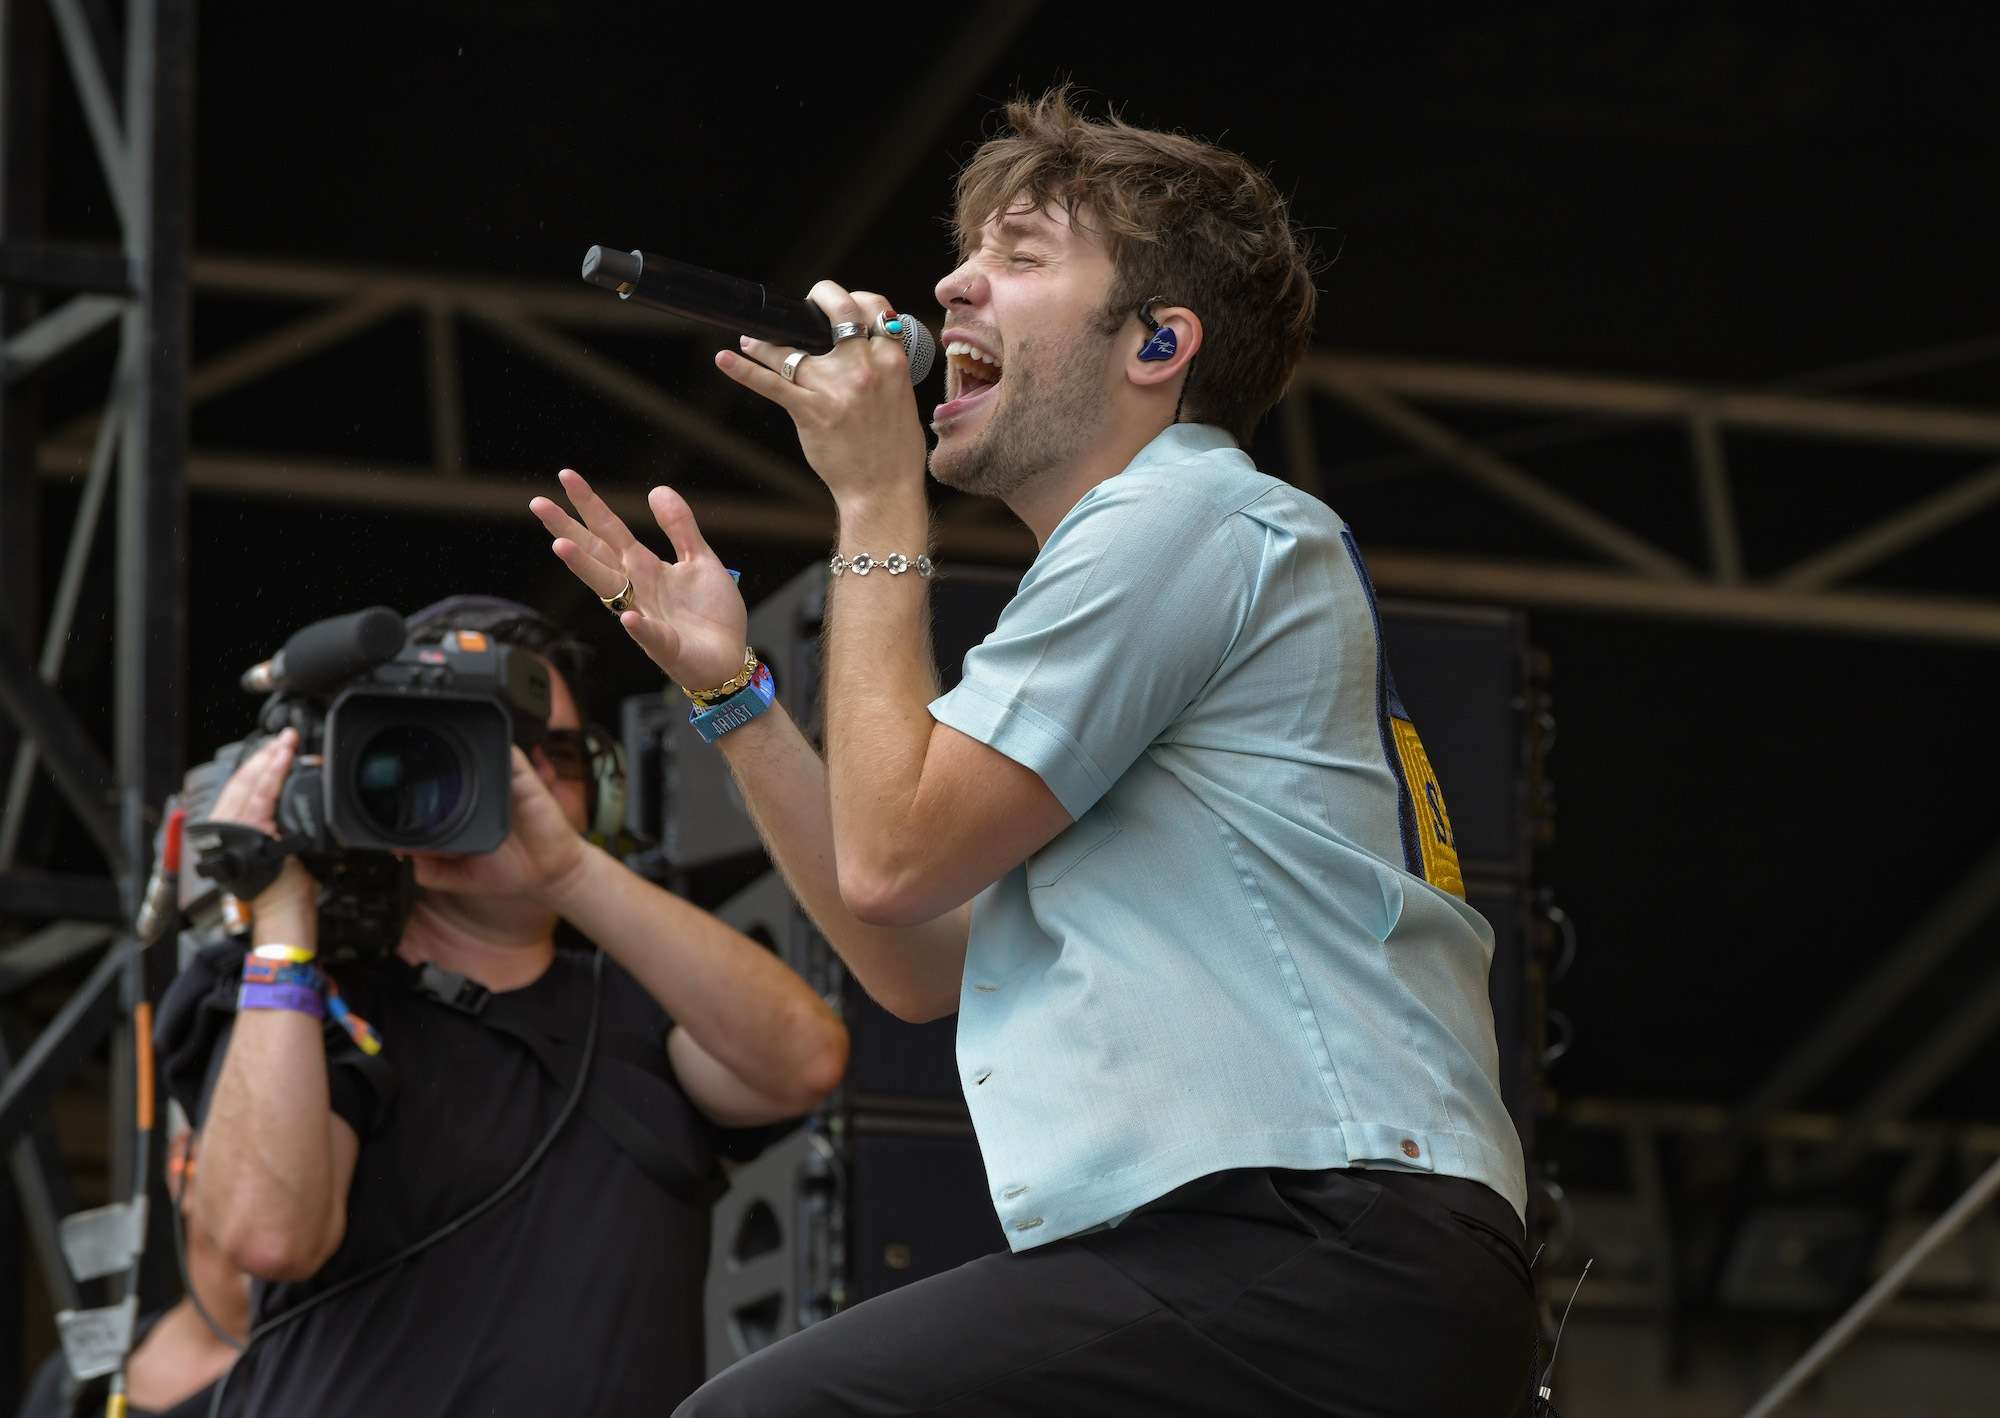 Christian French Live at Lollapalooza [GALLERY] 6